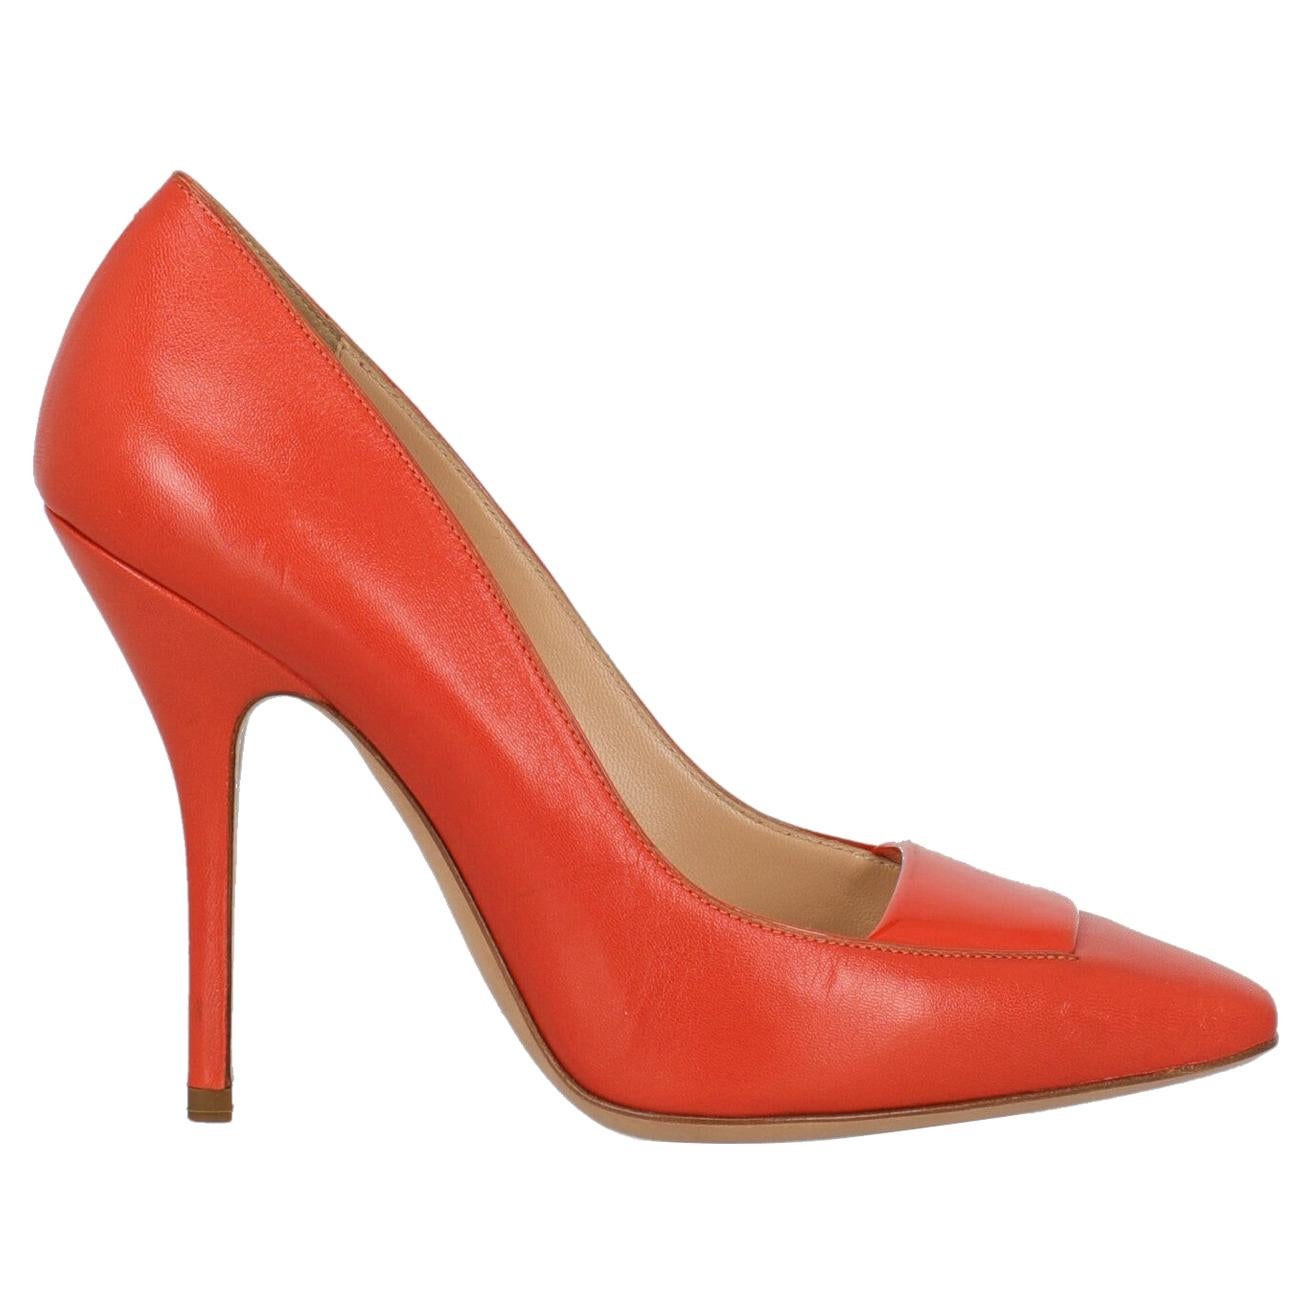 Bally Woman Pumps Orange Leather IT 40 For Sale